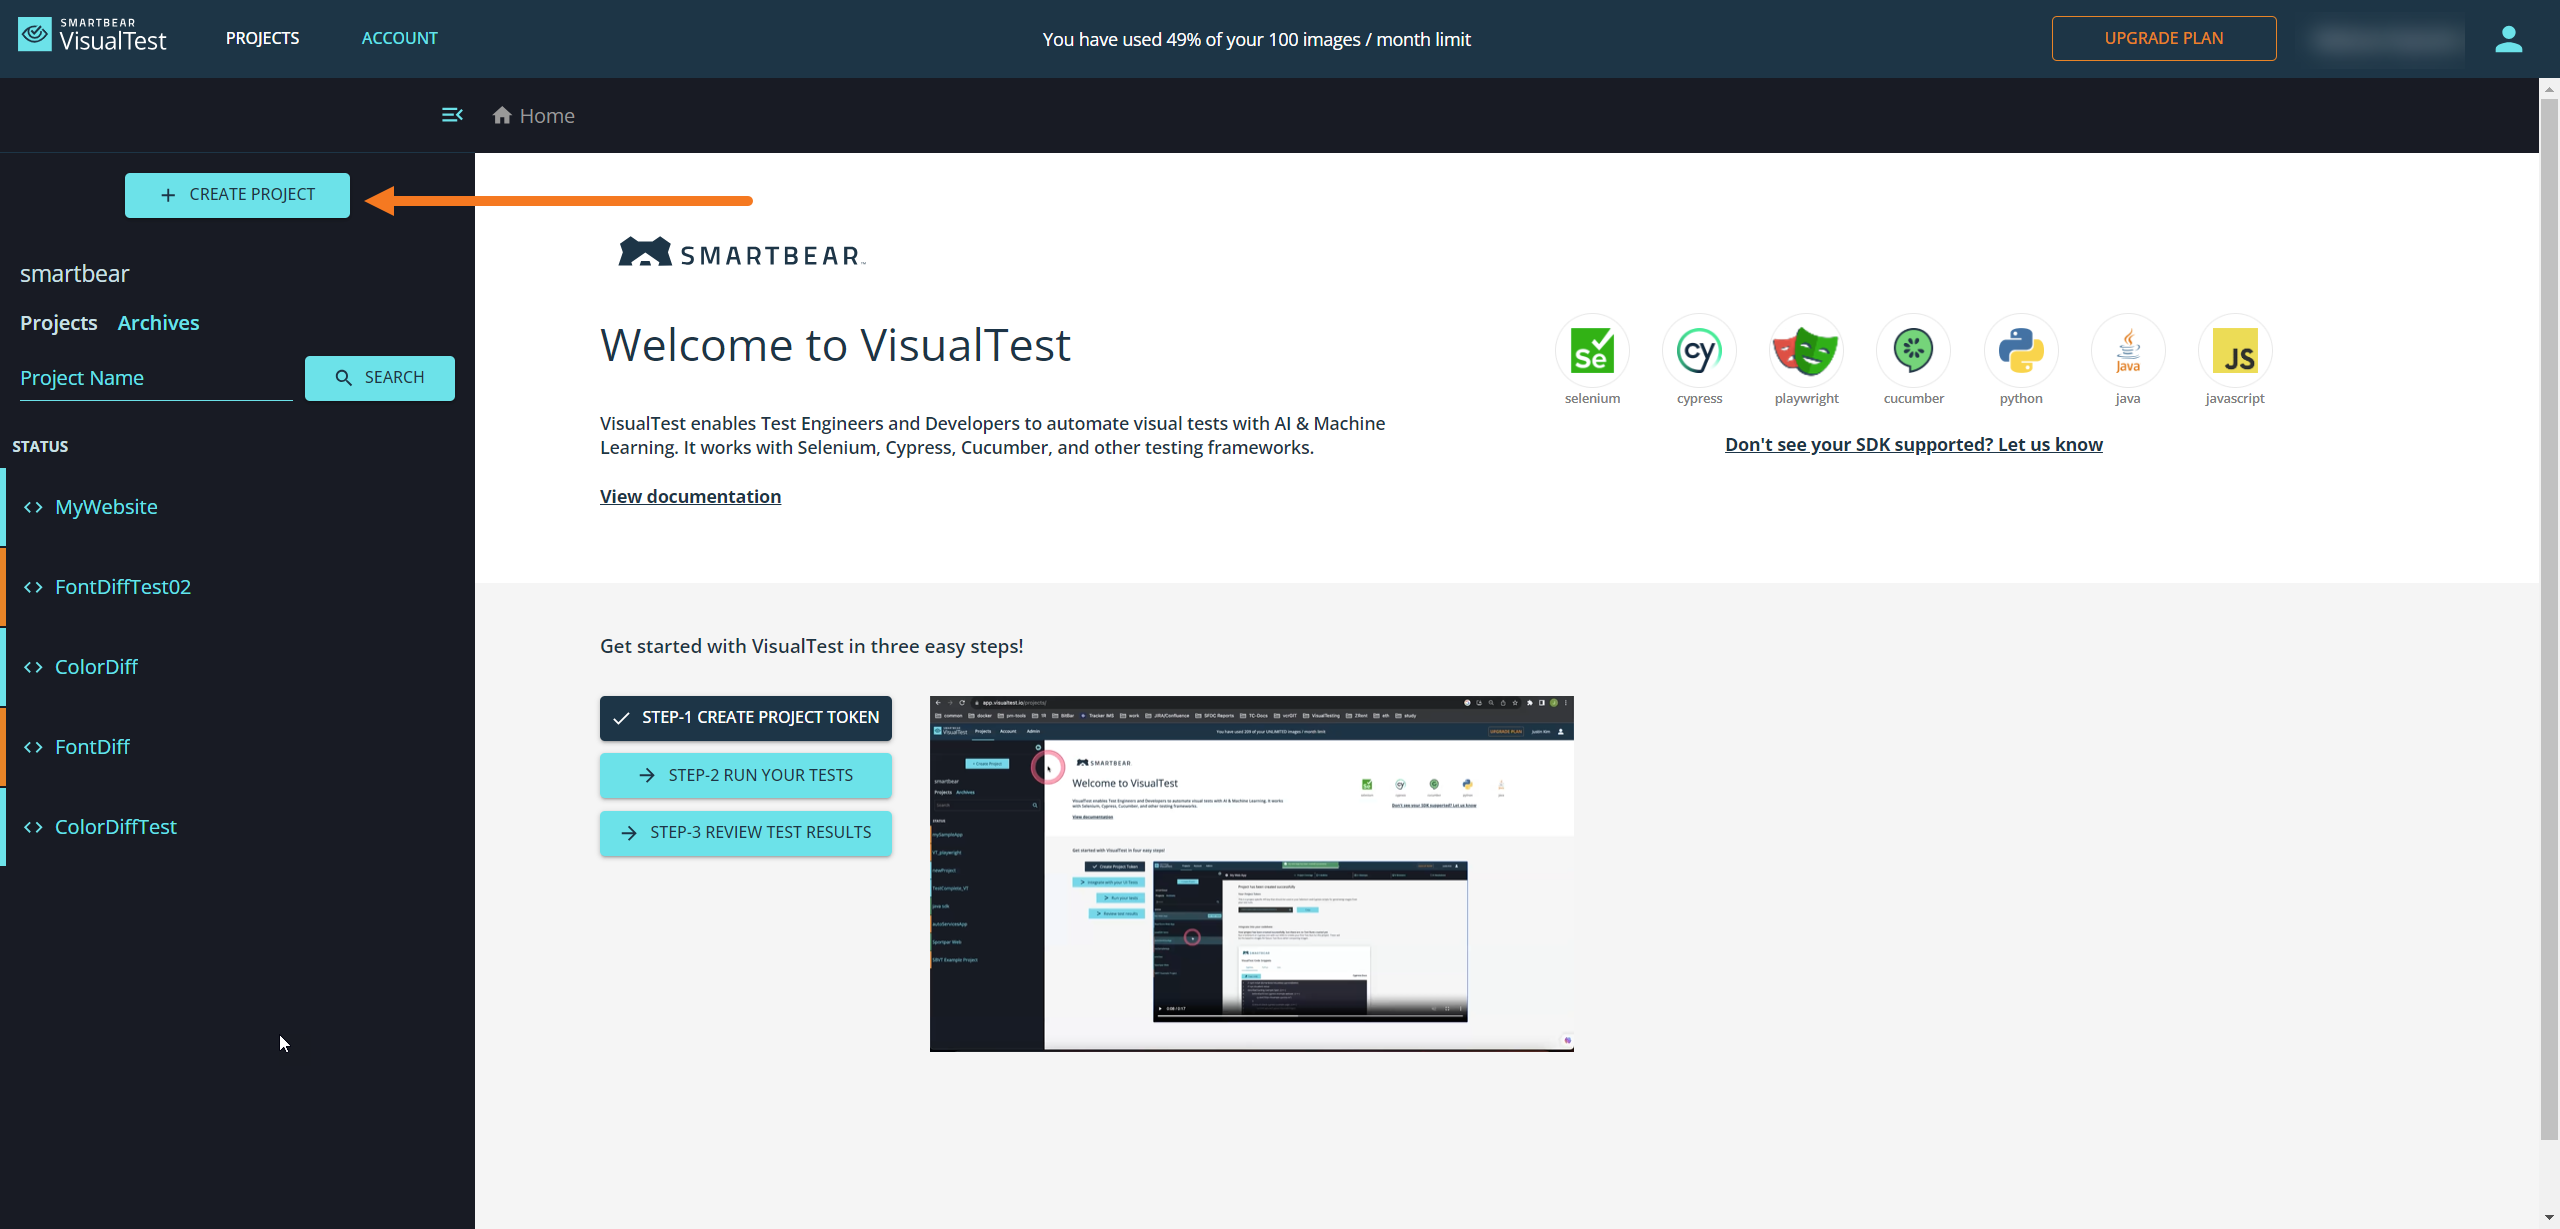 A screenshot of the VisualTest home page with the Create Project button indicated.